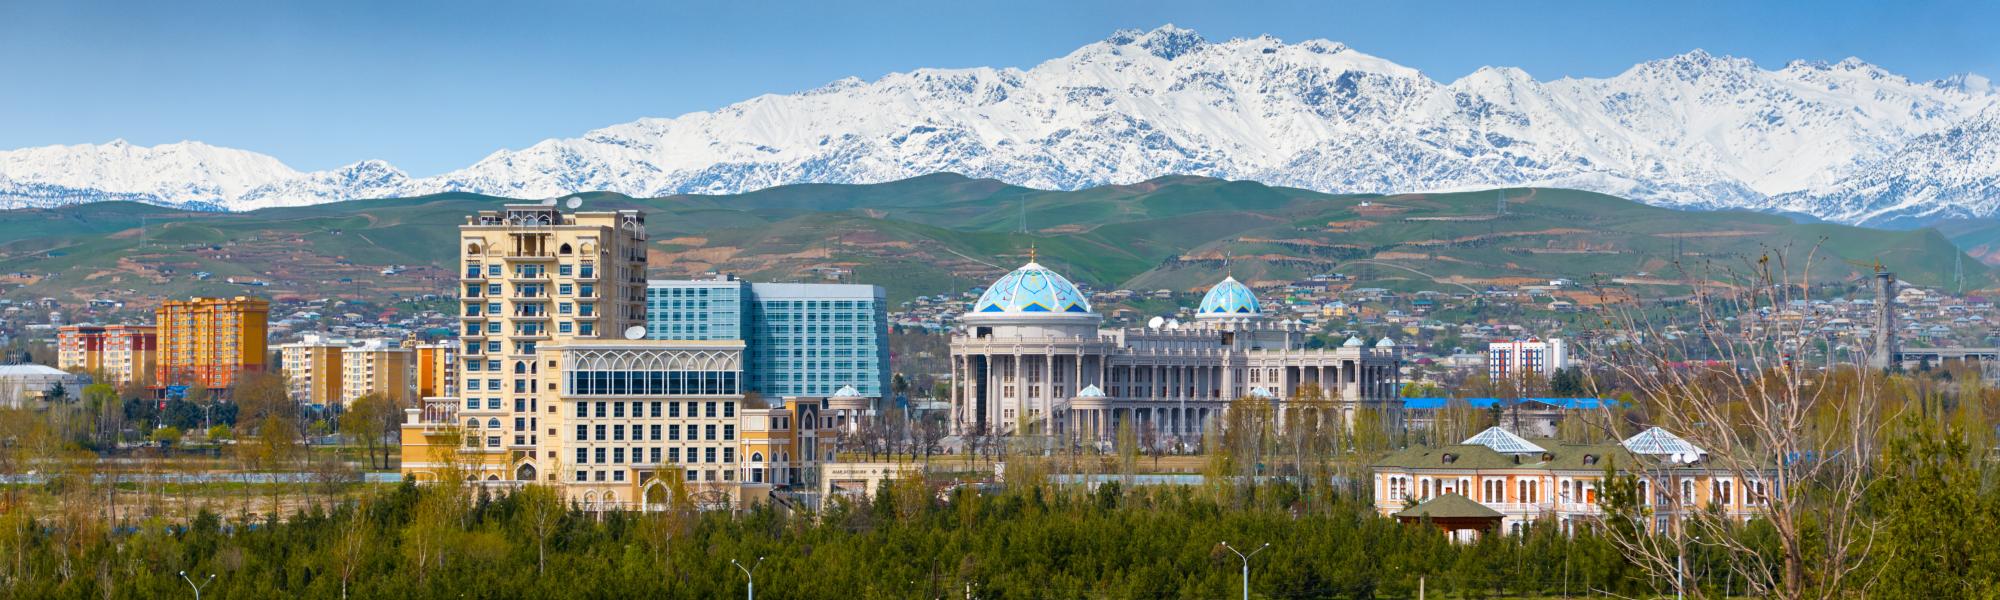 Tajikistan – Transport Ministry leader reveals how TIR in China will open up “vast opportunities” for the region